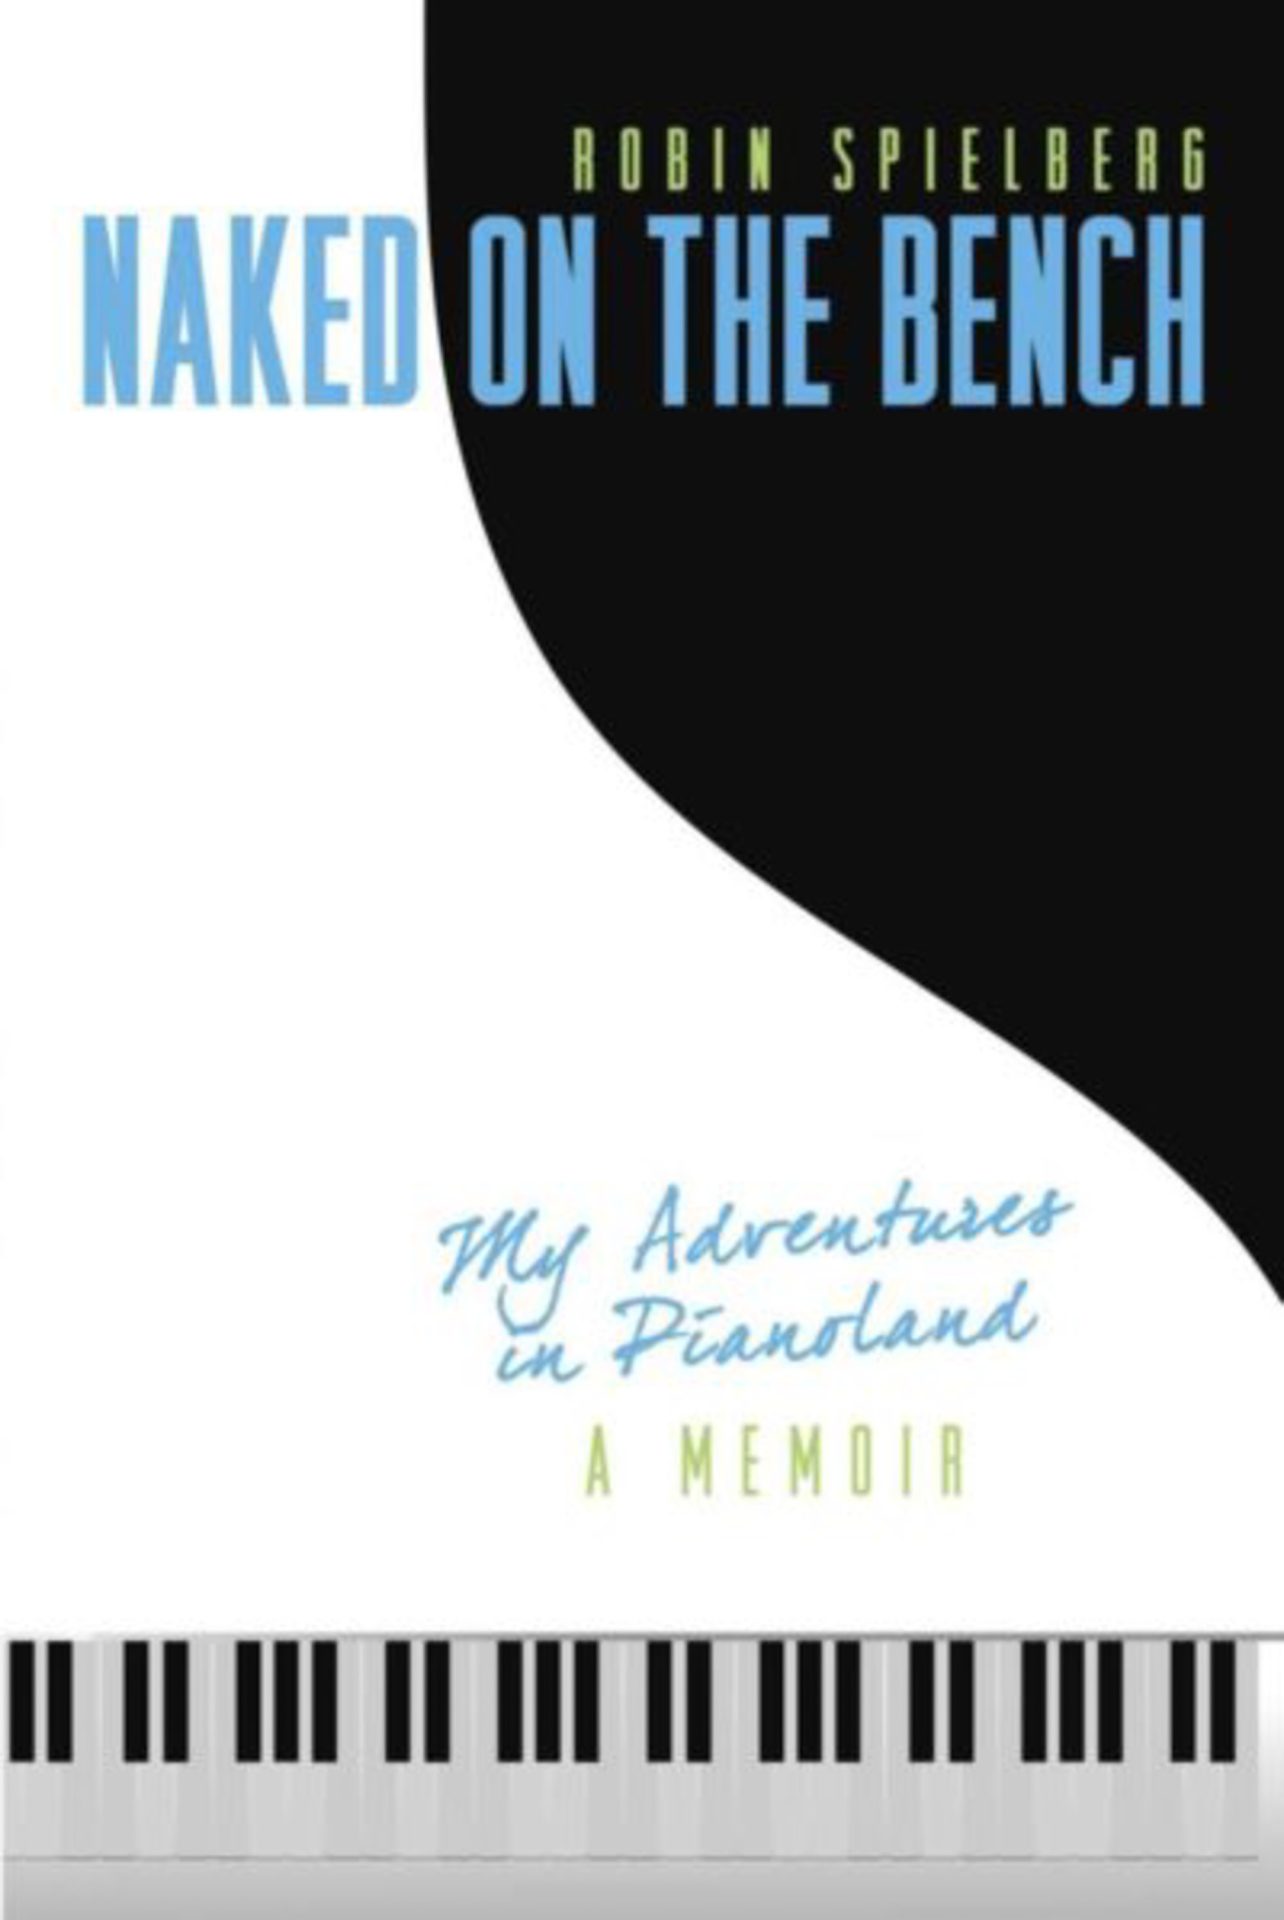 The book cover for Naked on the Bench.